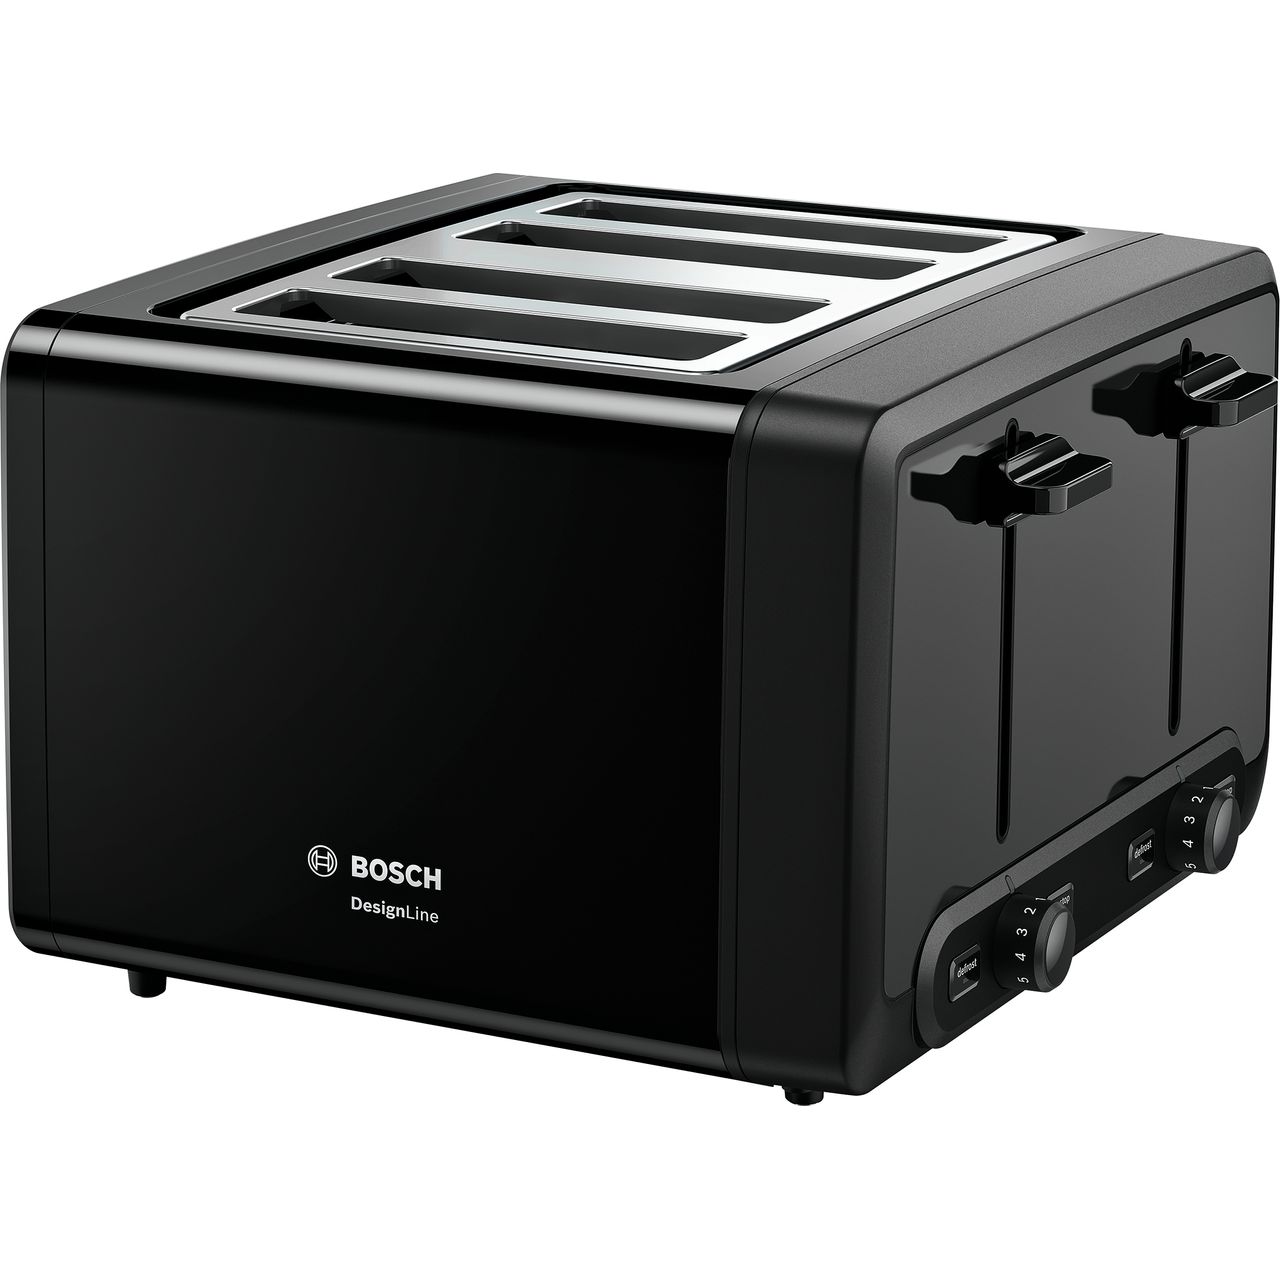 Bosch TAT4P443GB 4 Slice Toaster Review